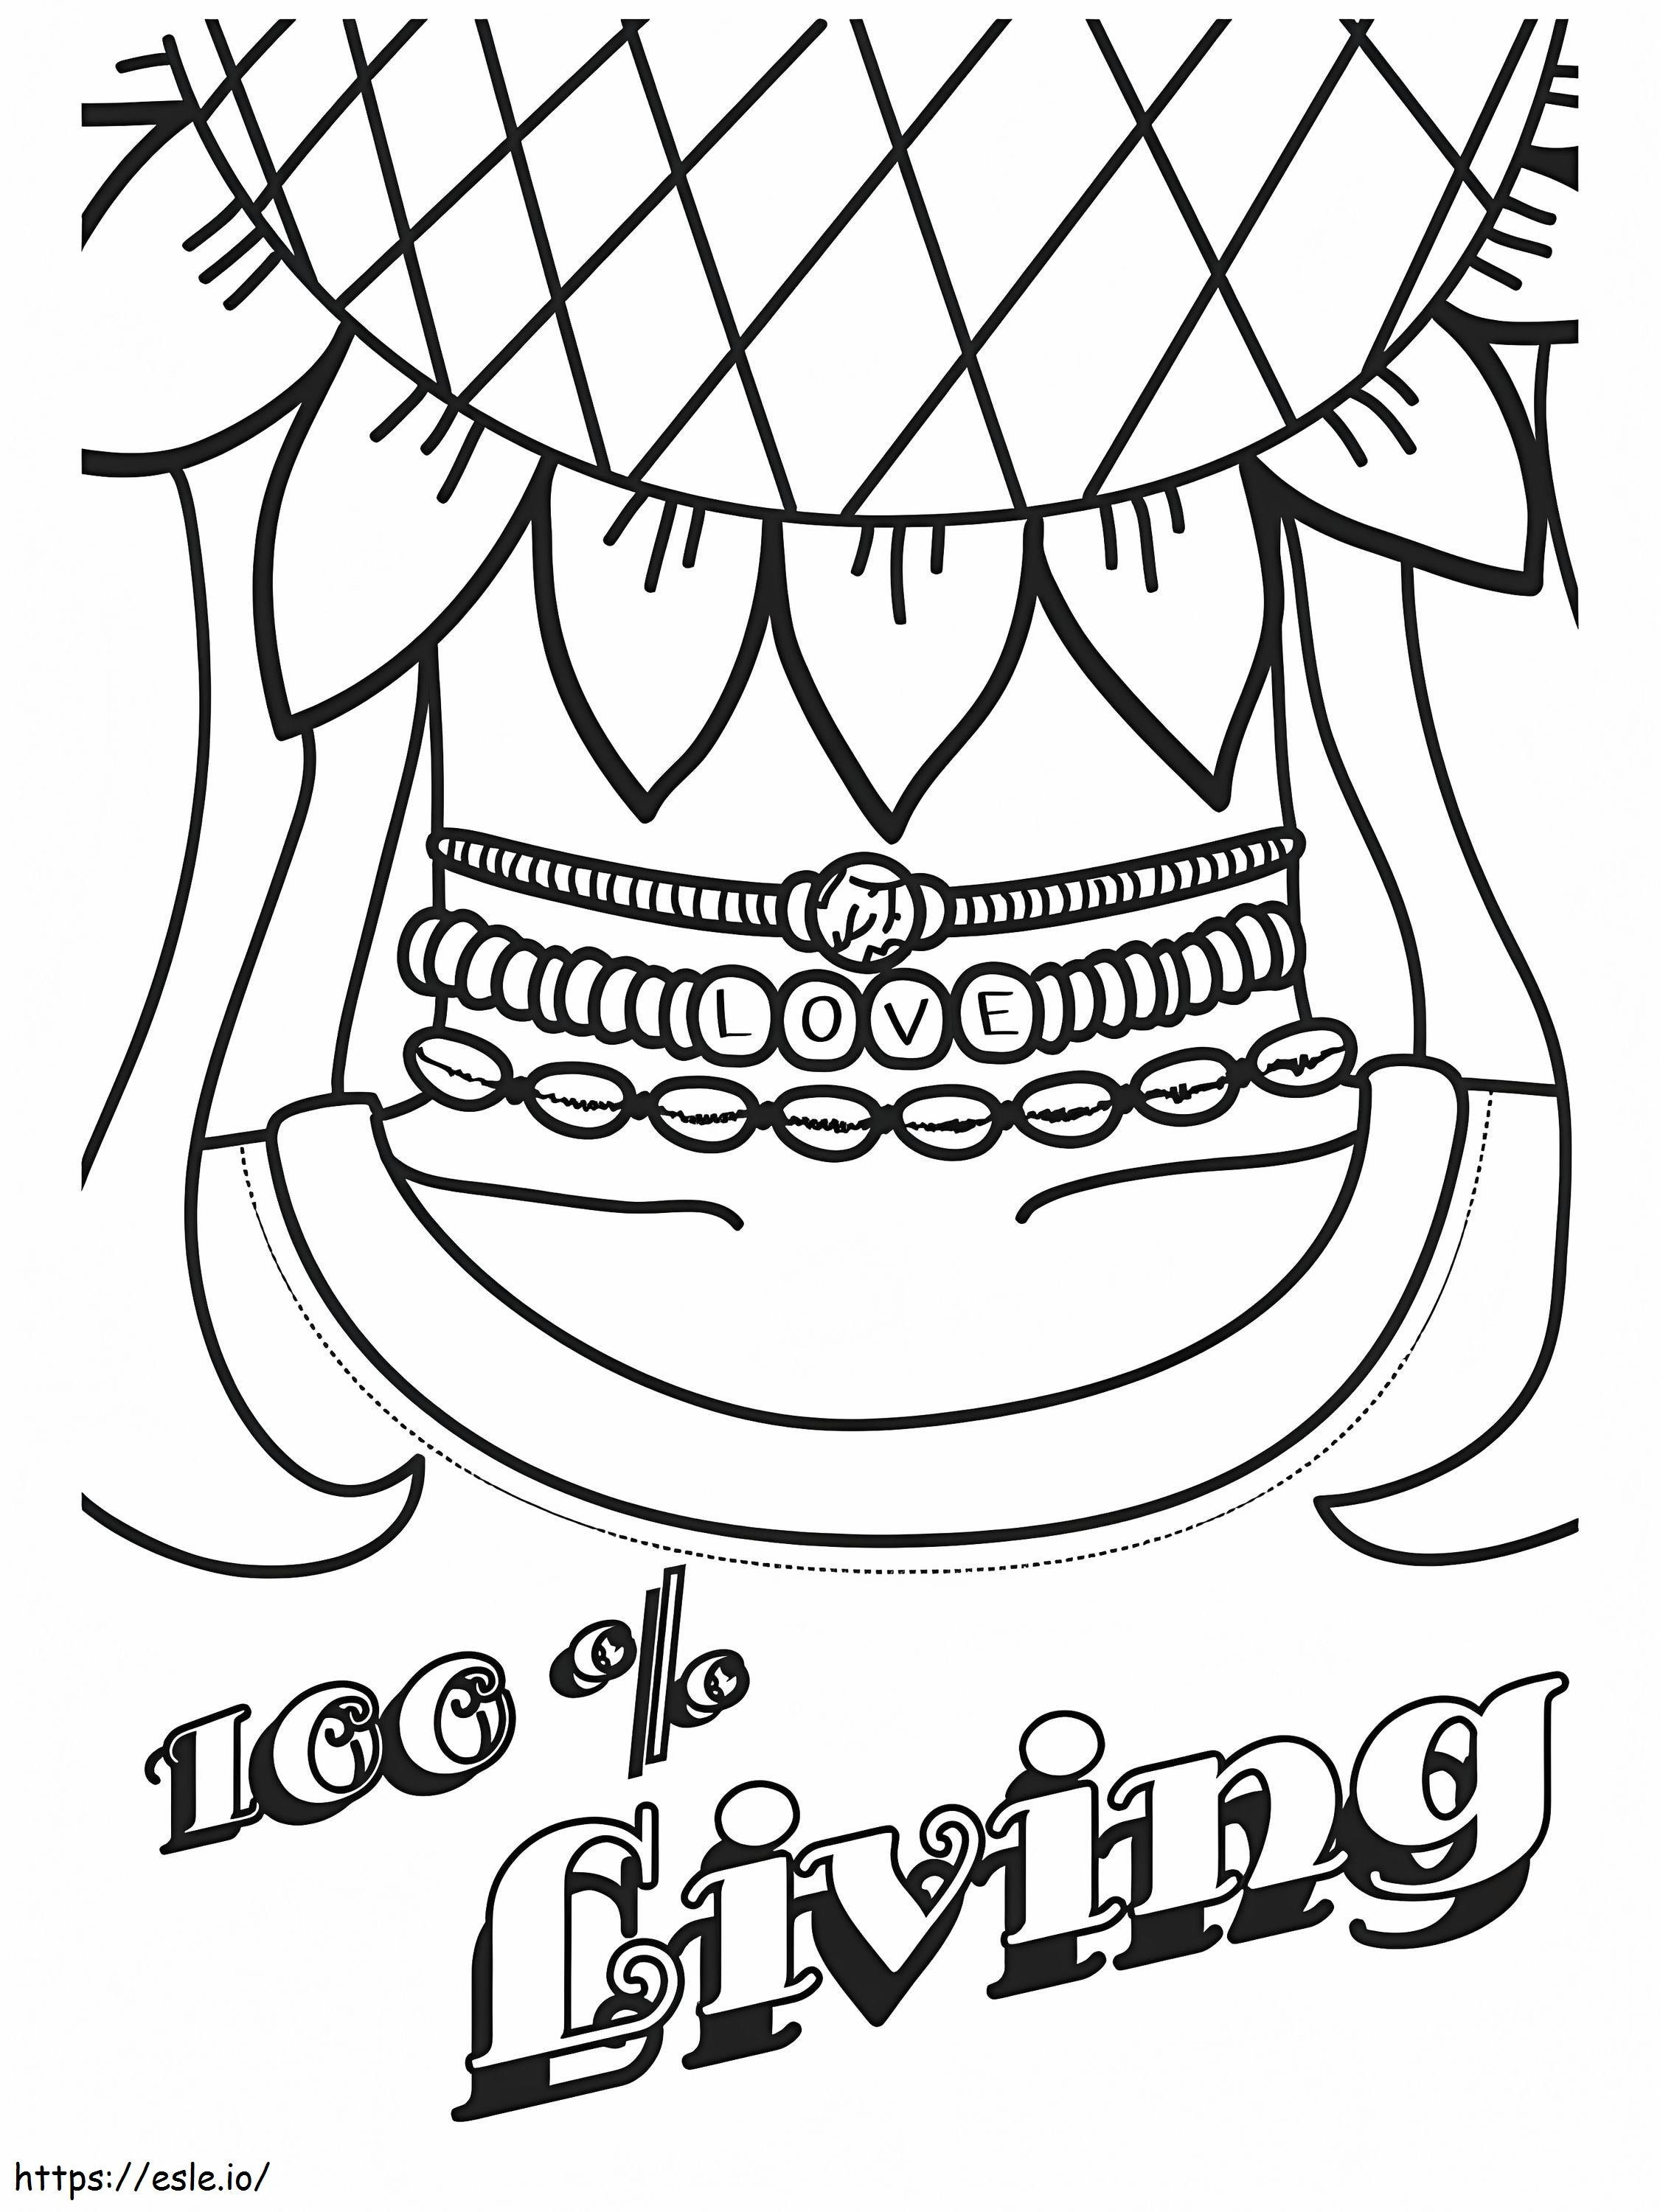 VSCO Girl 100 Percent Living coloring page